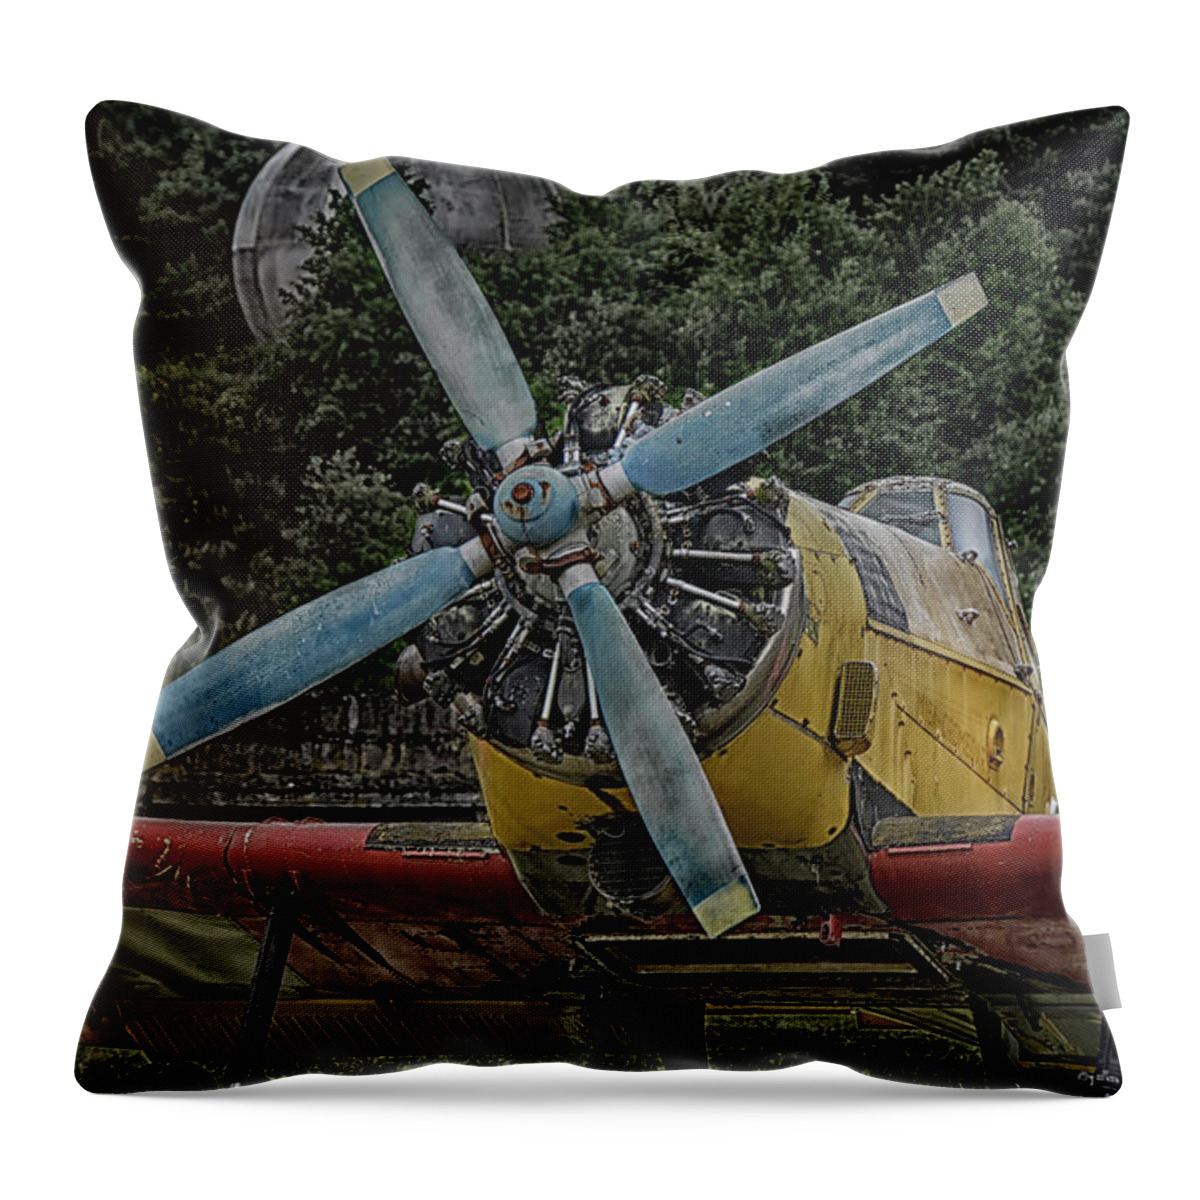 Yellow Throw Pillow featuring the photograph The Old Little Yellow One by Joachim G Pinkawa